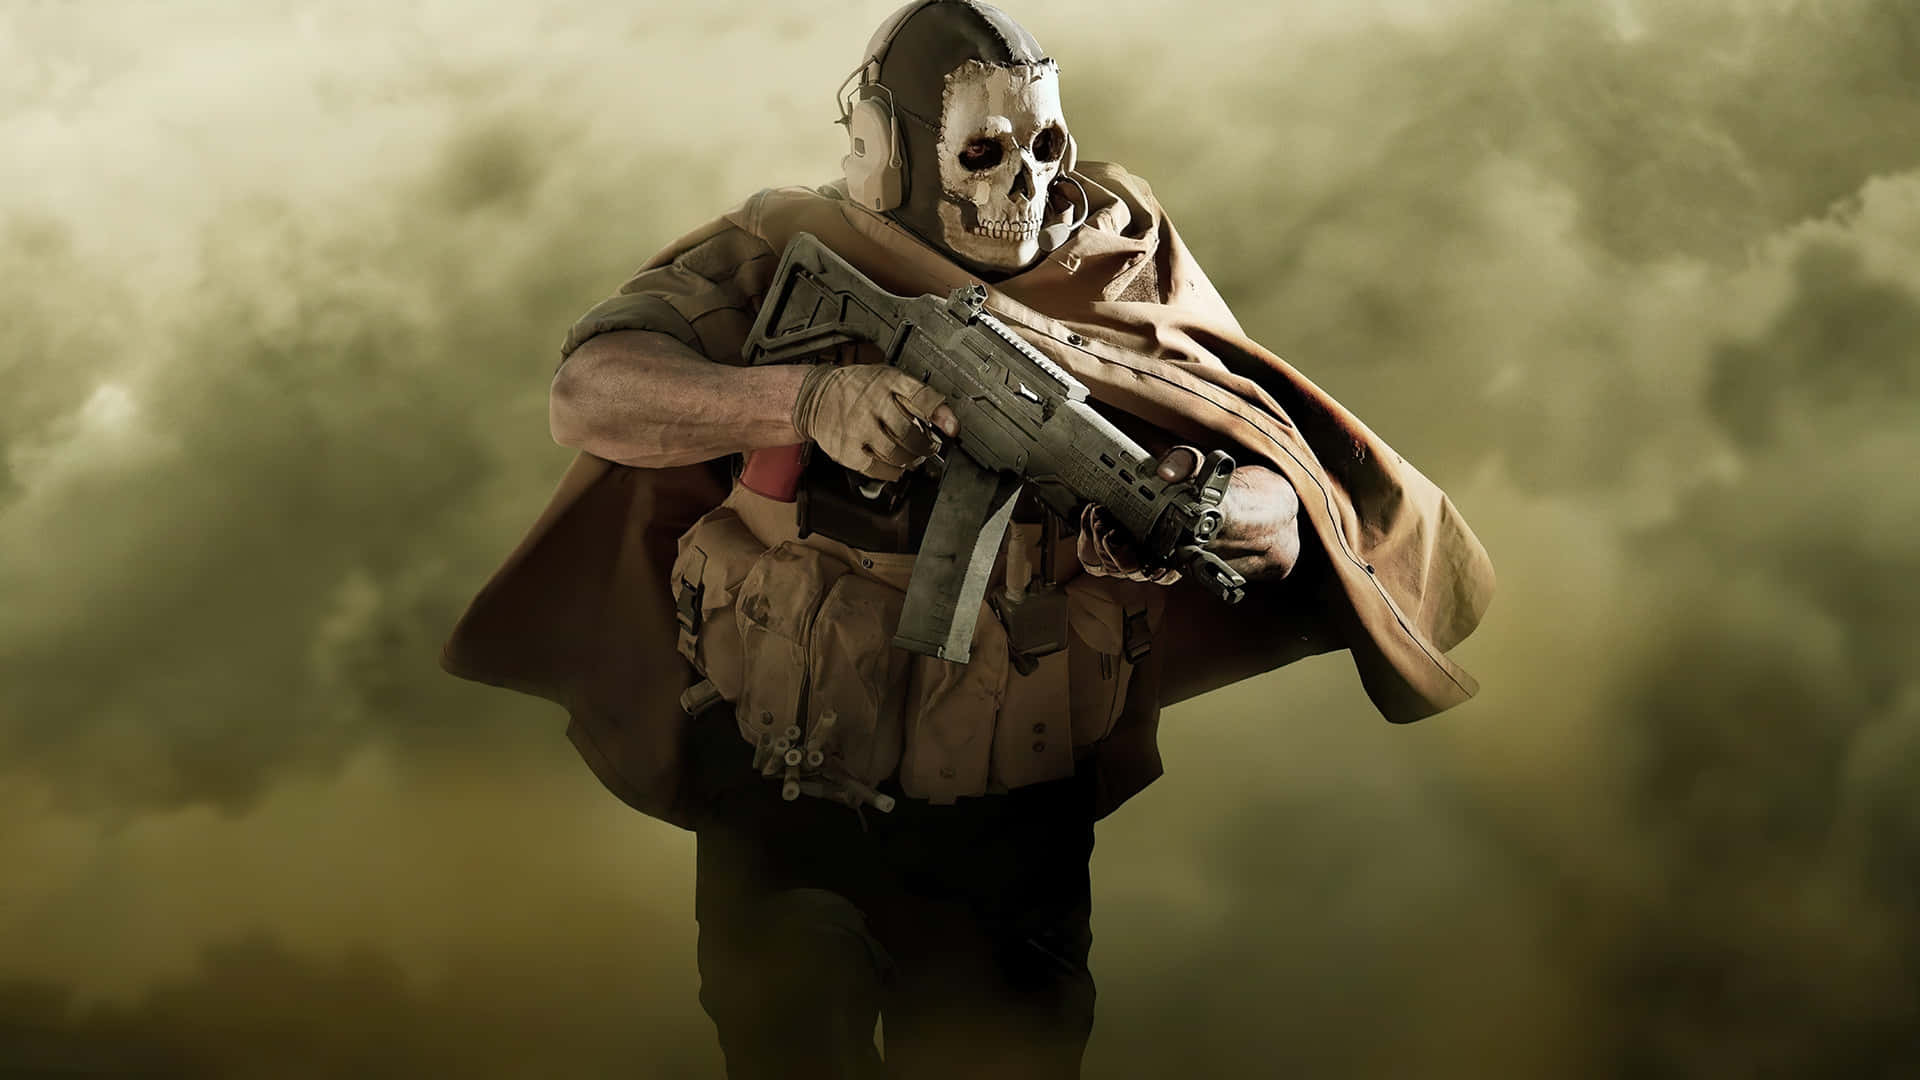 A Man In A Mask Is Holding A Gun